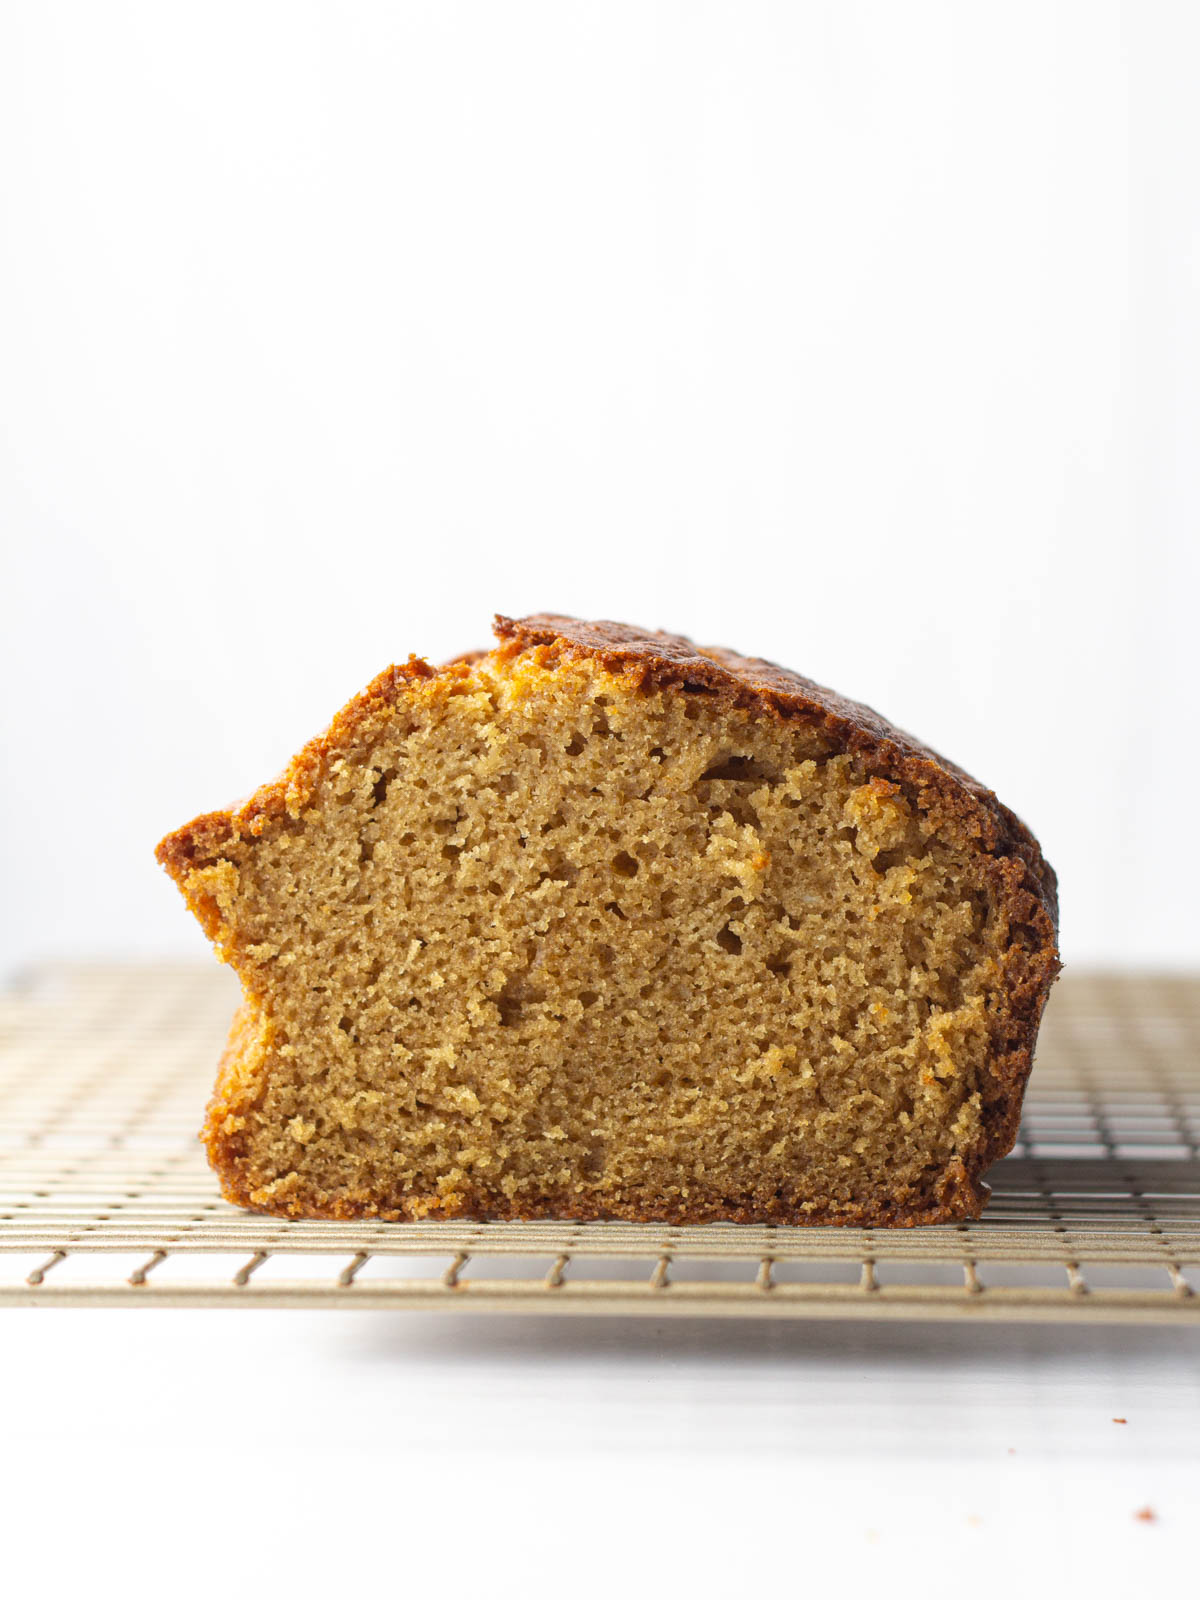 Side view of the cut side of a loaf of chai bread on top of a gold wire rack.